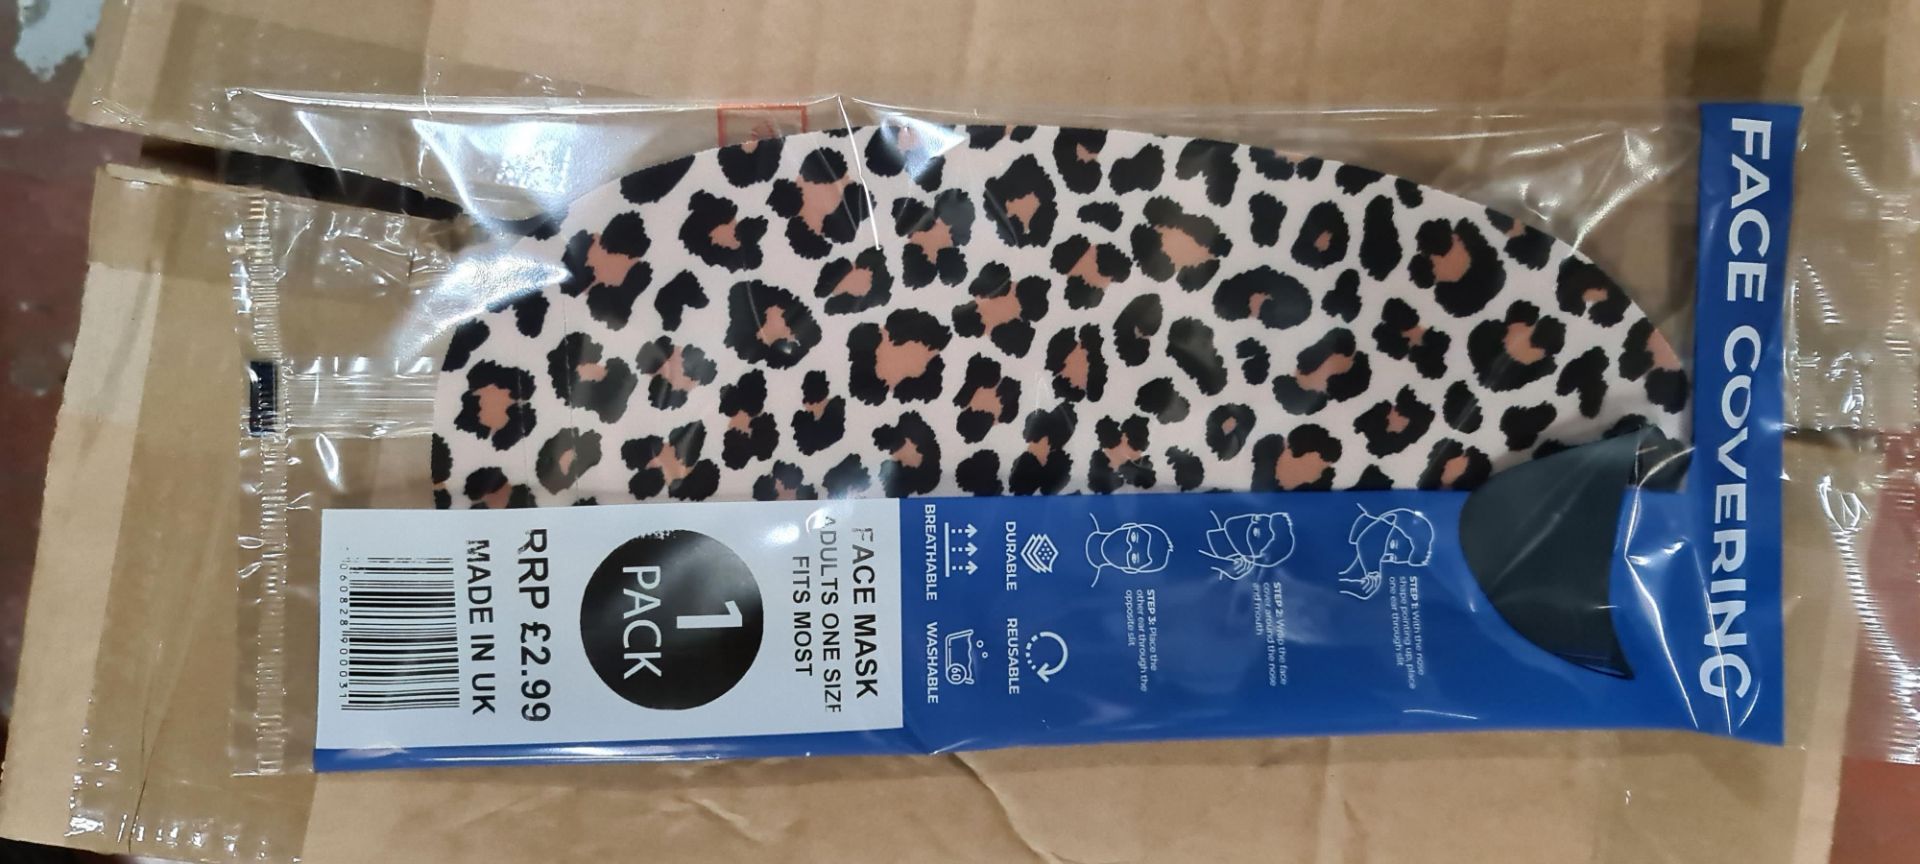 100 off adult face masks, individually packaged, in leopard print